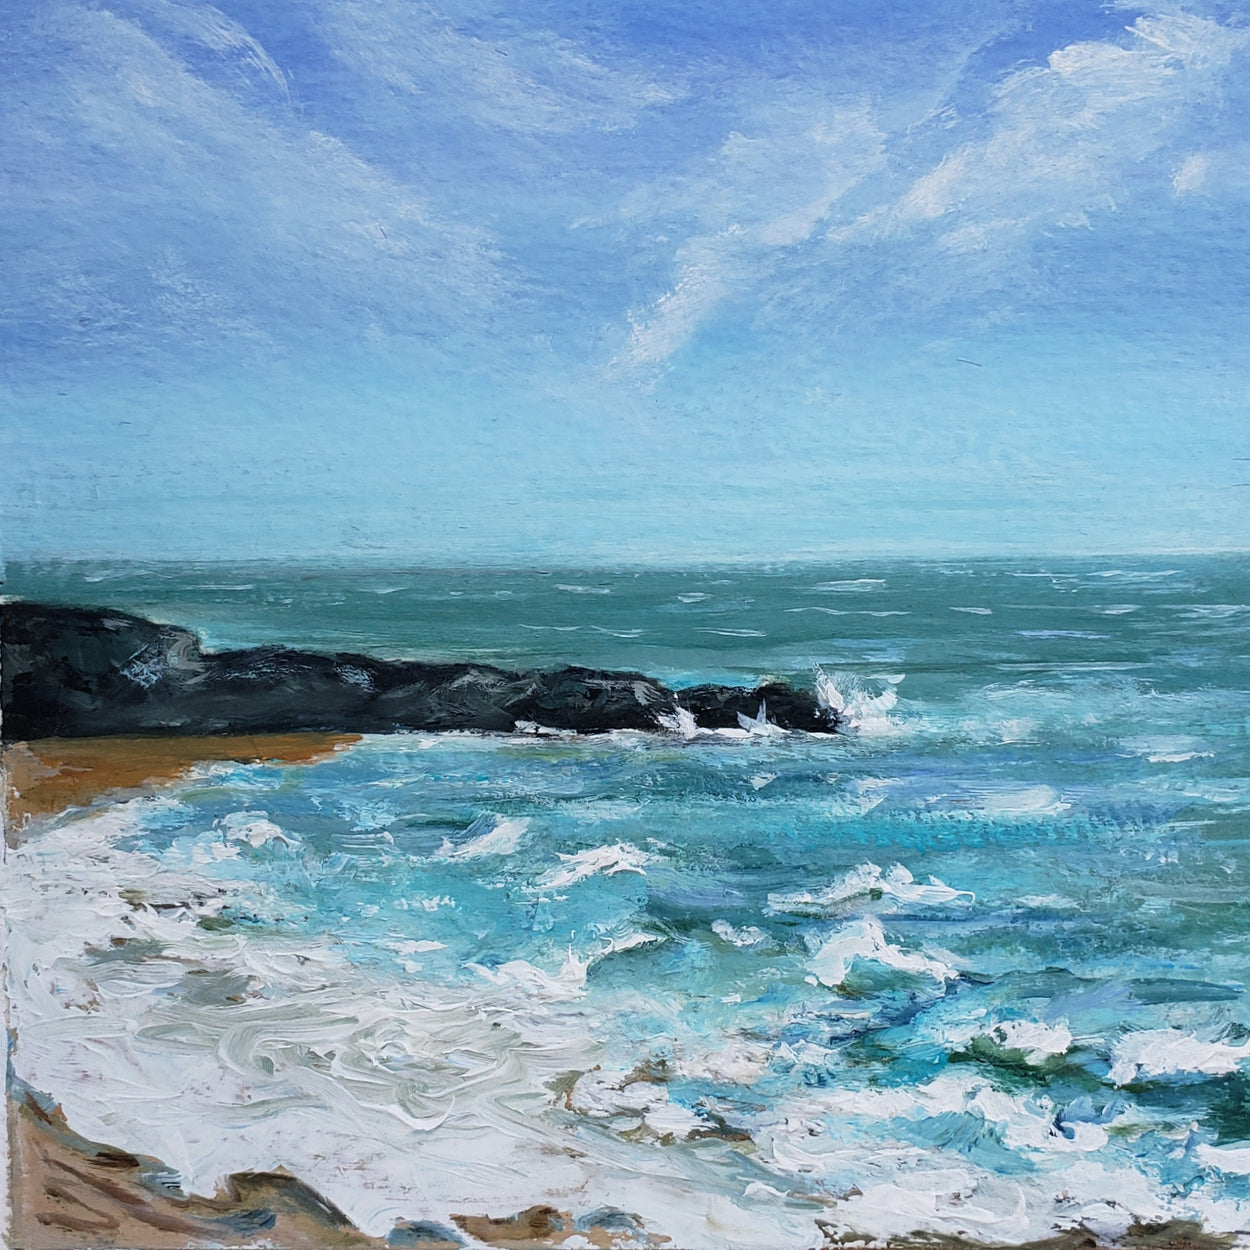 Original oil painting on hand made paper... Ocean rolling onto the shore with waves and foam as it touches the beach..with a beautiful blue sky and wispy clouds. Will arrive matted in a 12x12 white mat ready for you to frame.